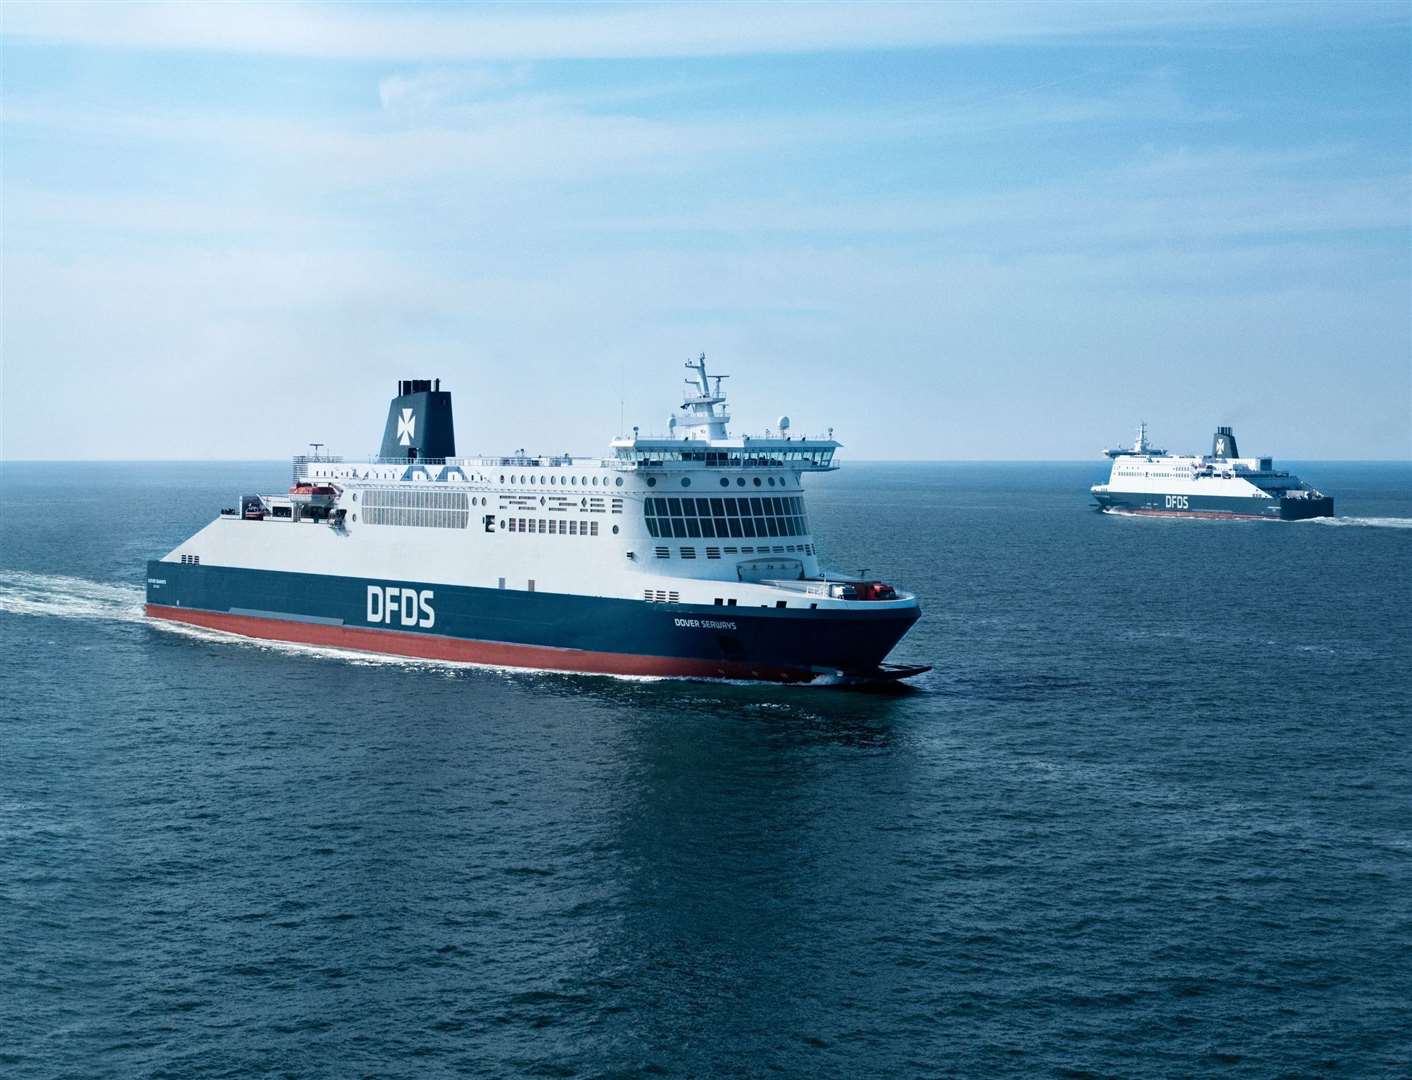 DFDS has resumed services for truckers from Dover but says its a "wait and see" approach with the weather conditions